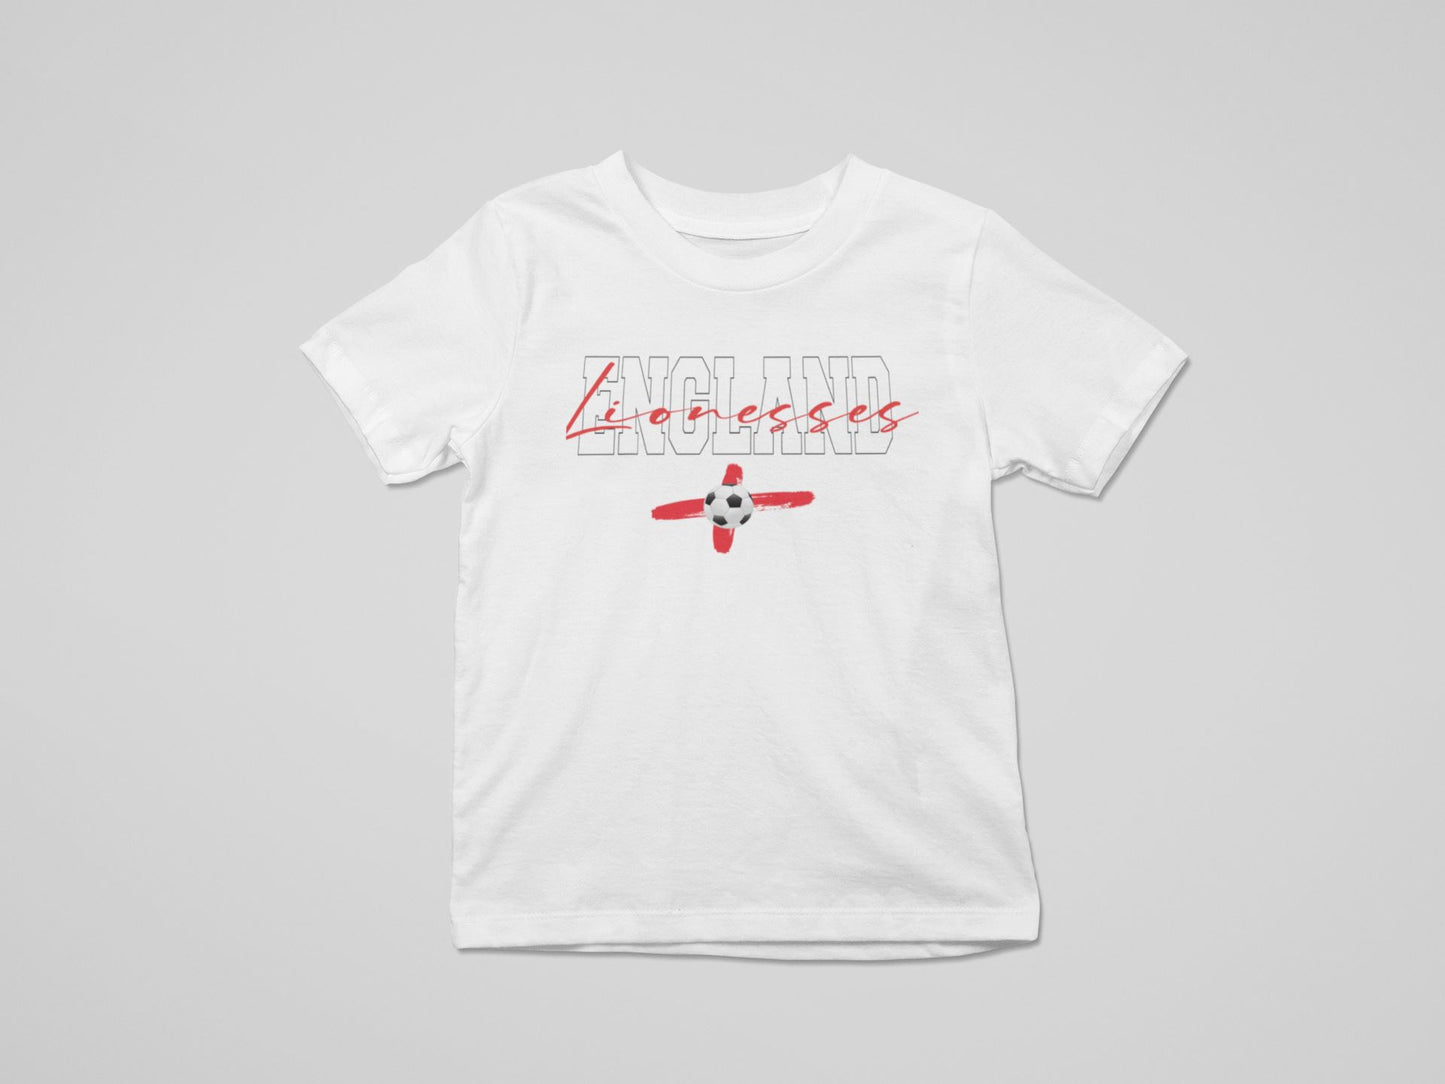 England World Cup Lionesses T-Shirts